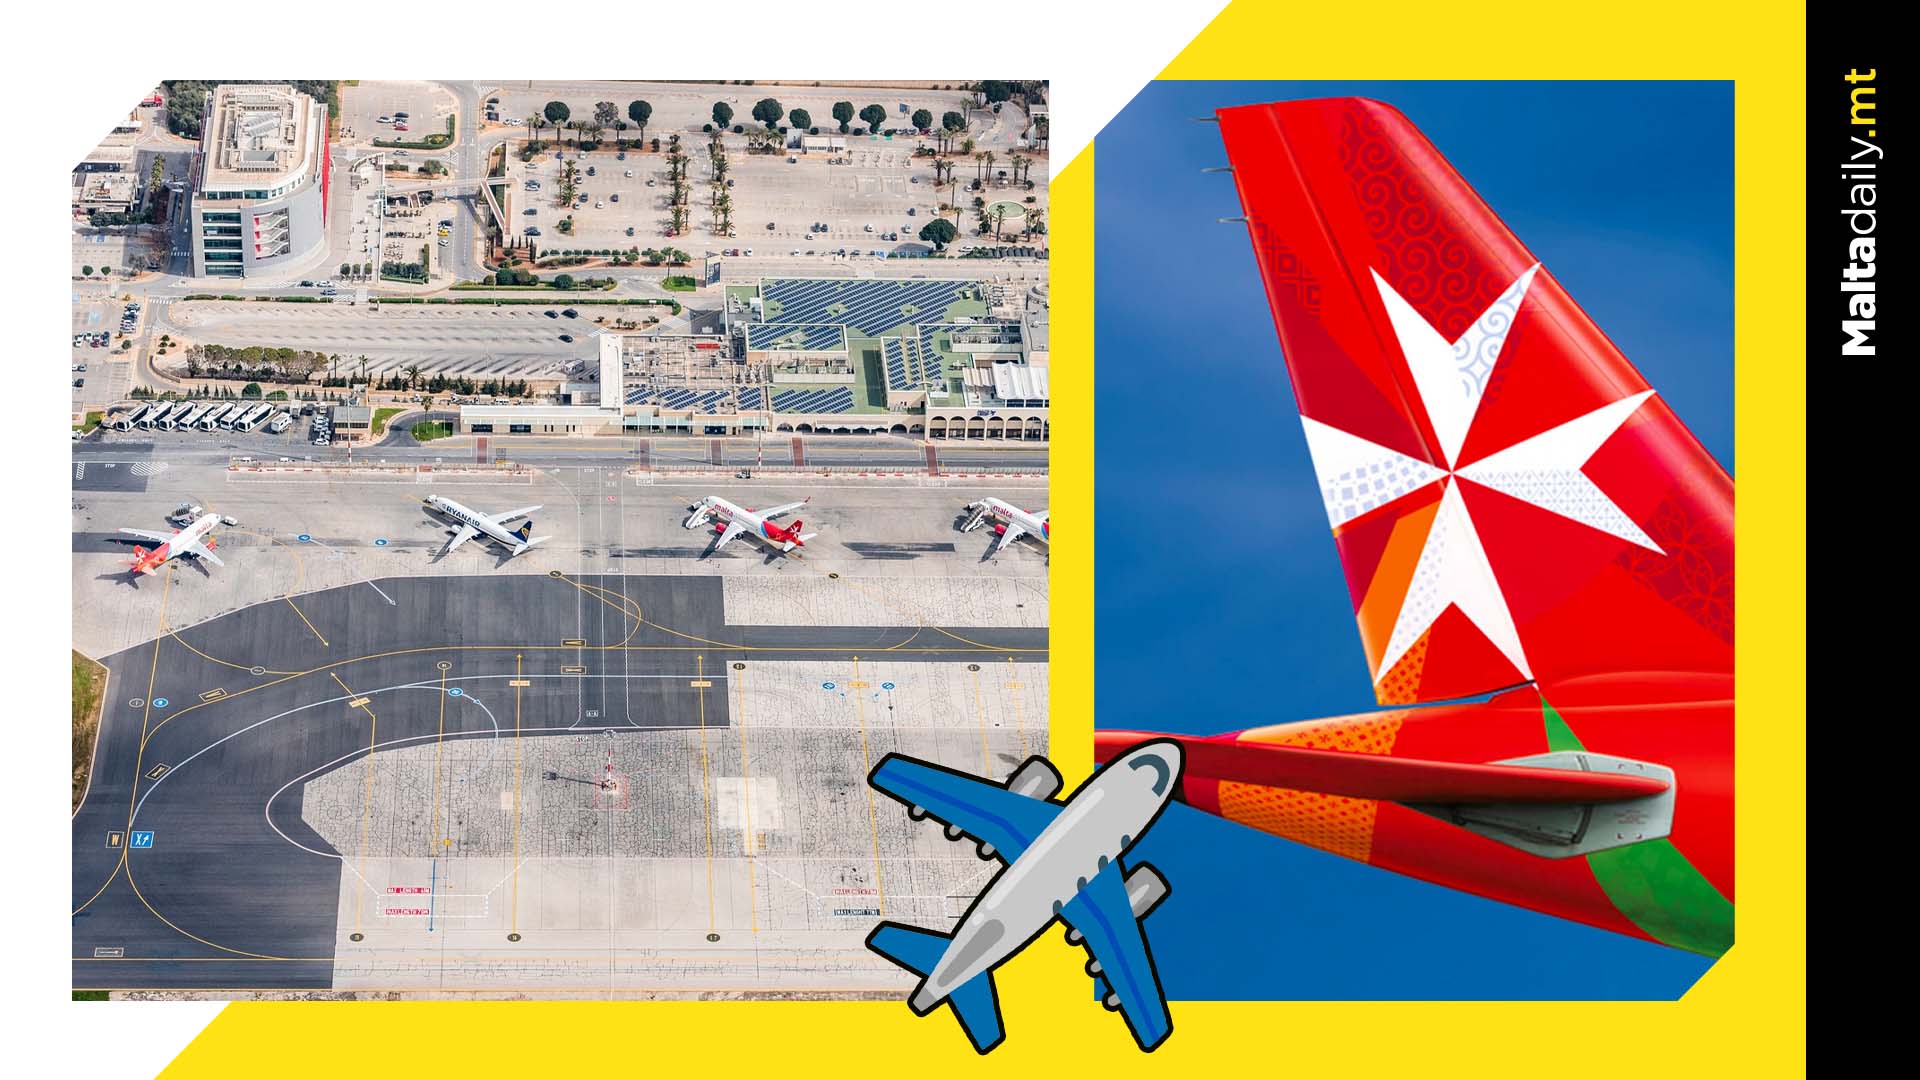 End of an era: Goodbye to AirMalta by end of 2023